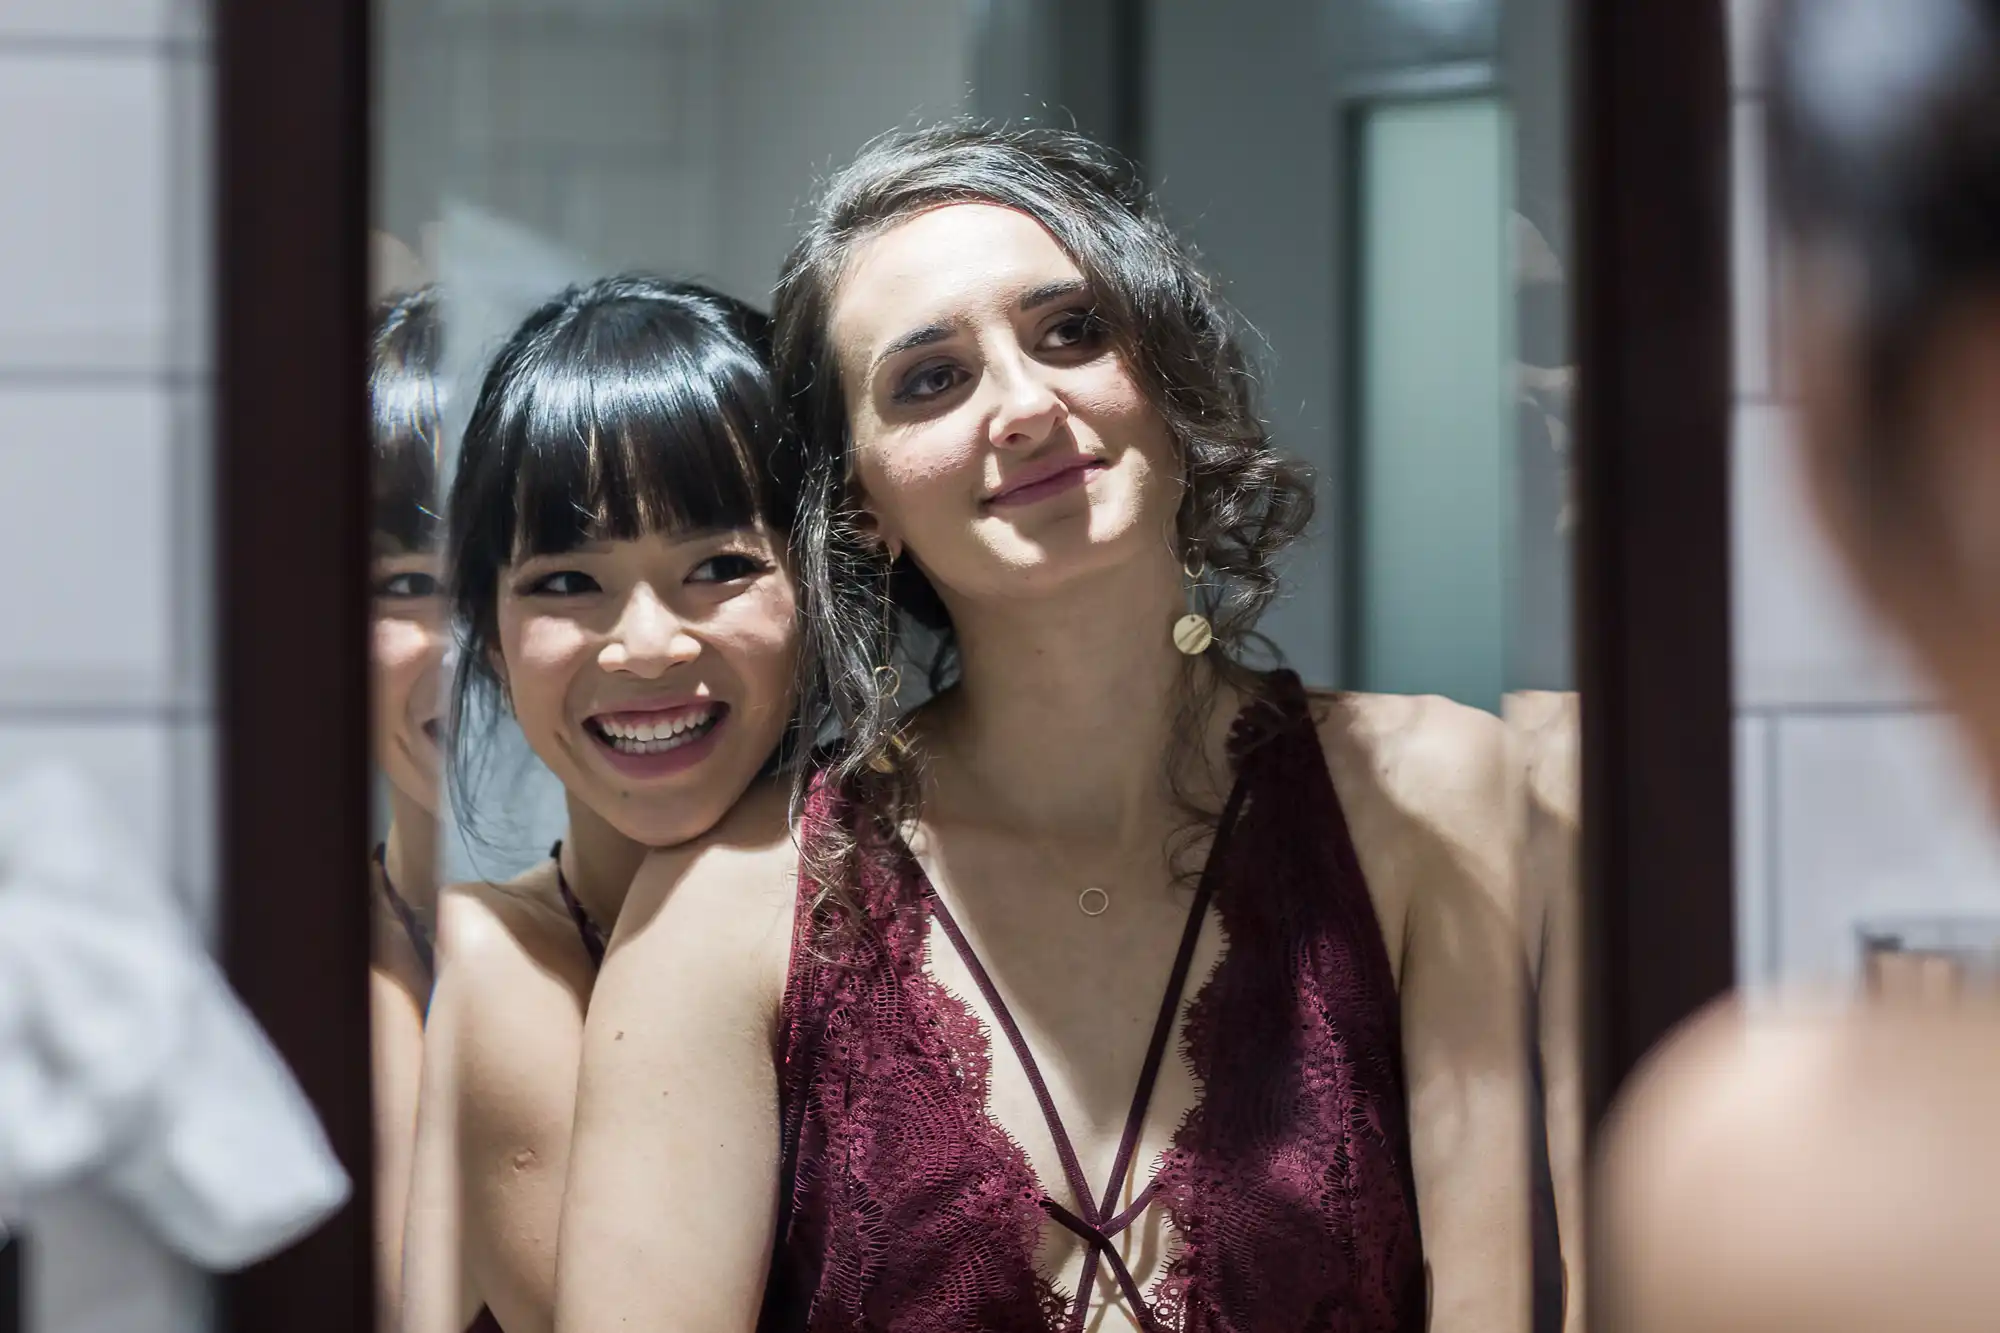 Two women wearing maroon dresses smile as they look into a mirror in a well-lit room. One stands behind the other, embracing her from the side.